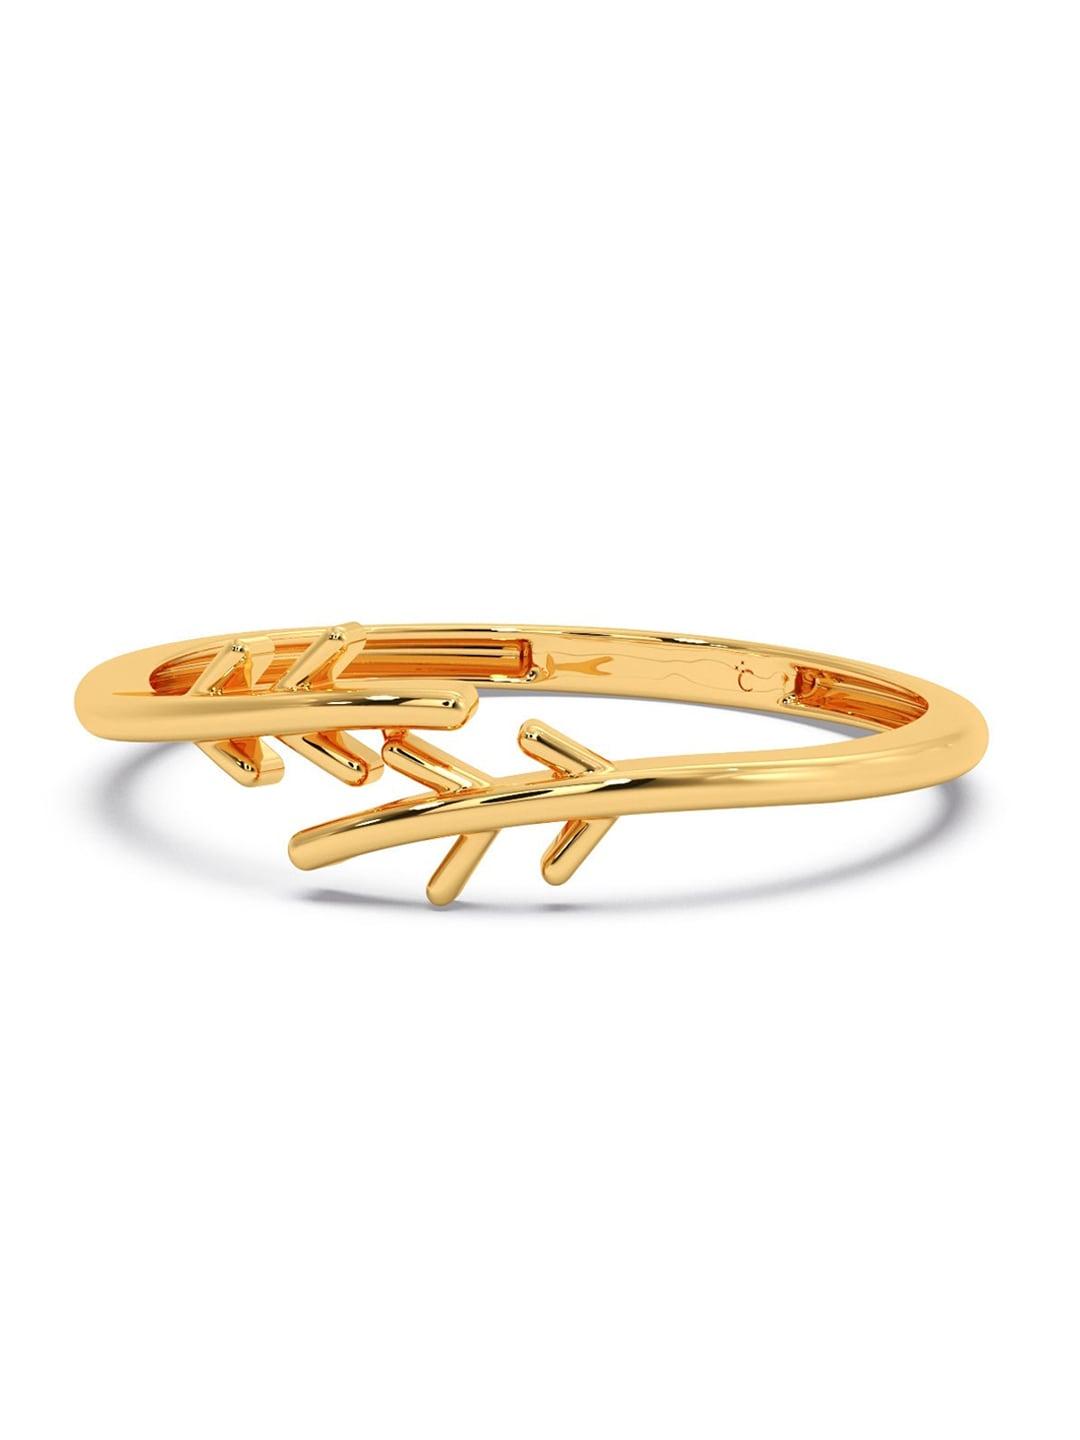 candere-a-kalyan-jewellers-company-18kt-gold-ring-0.47gm